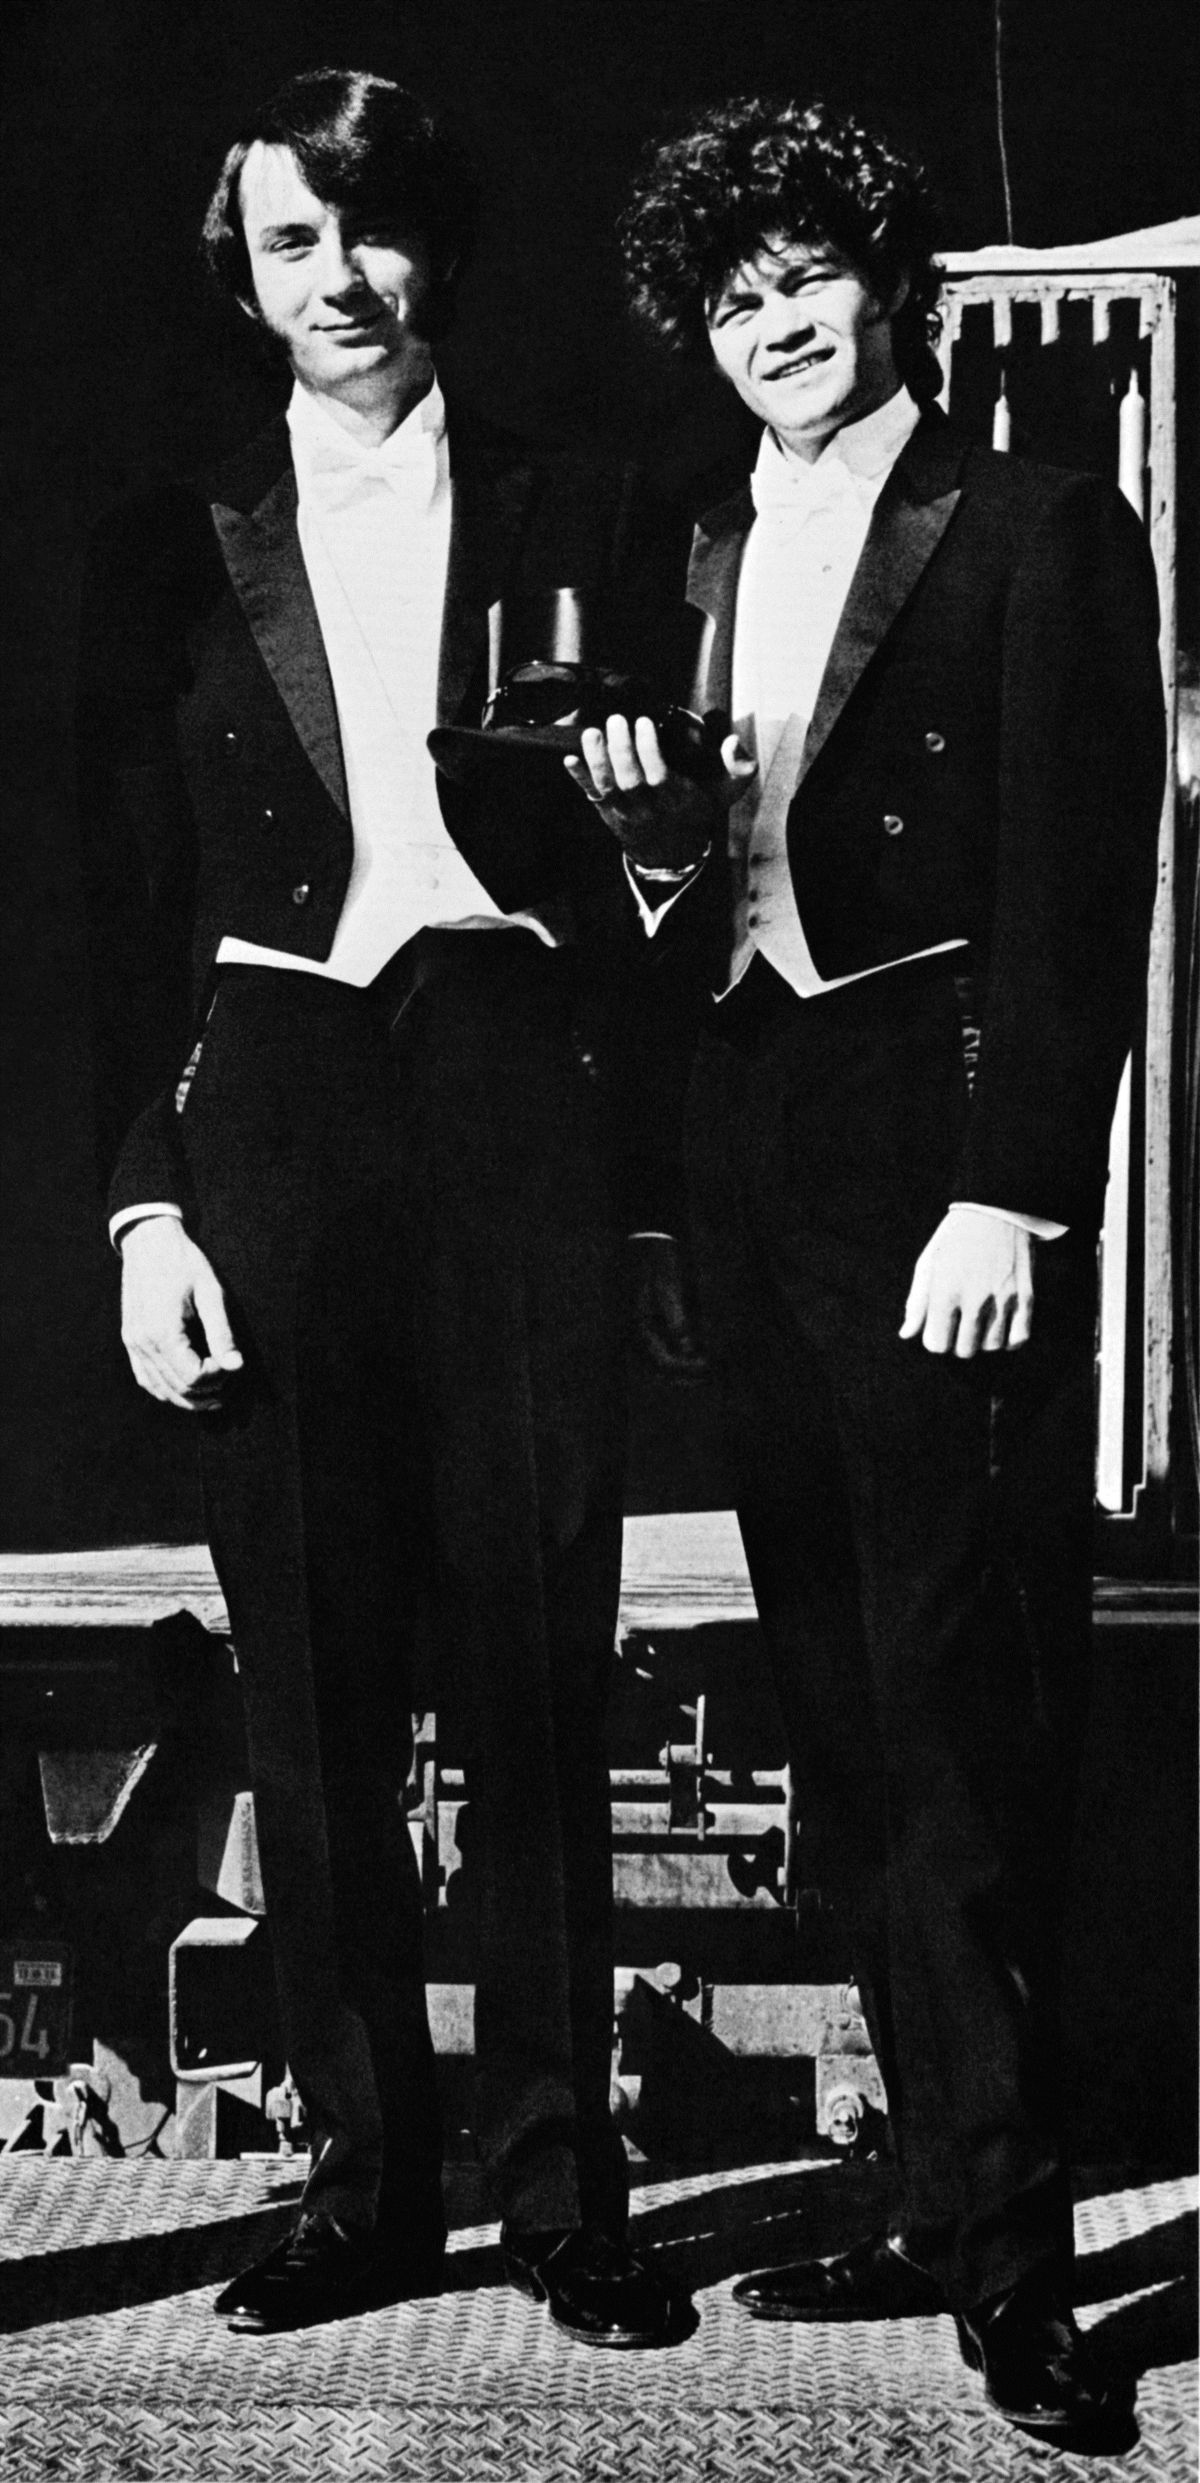 Michael Nesmith and Mickey Dolenz of the Monkees.  (Beatland Tours)